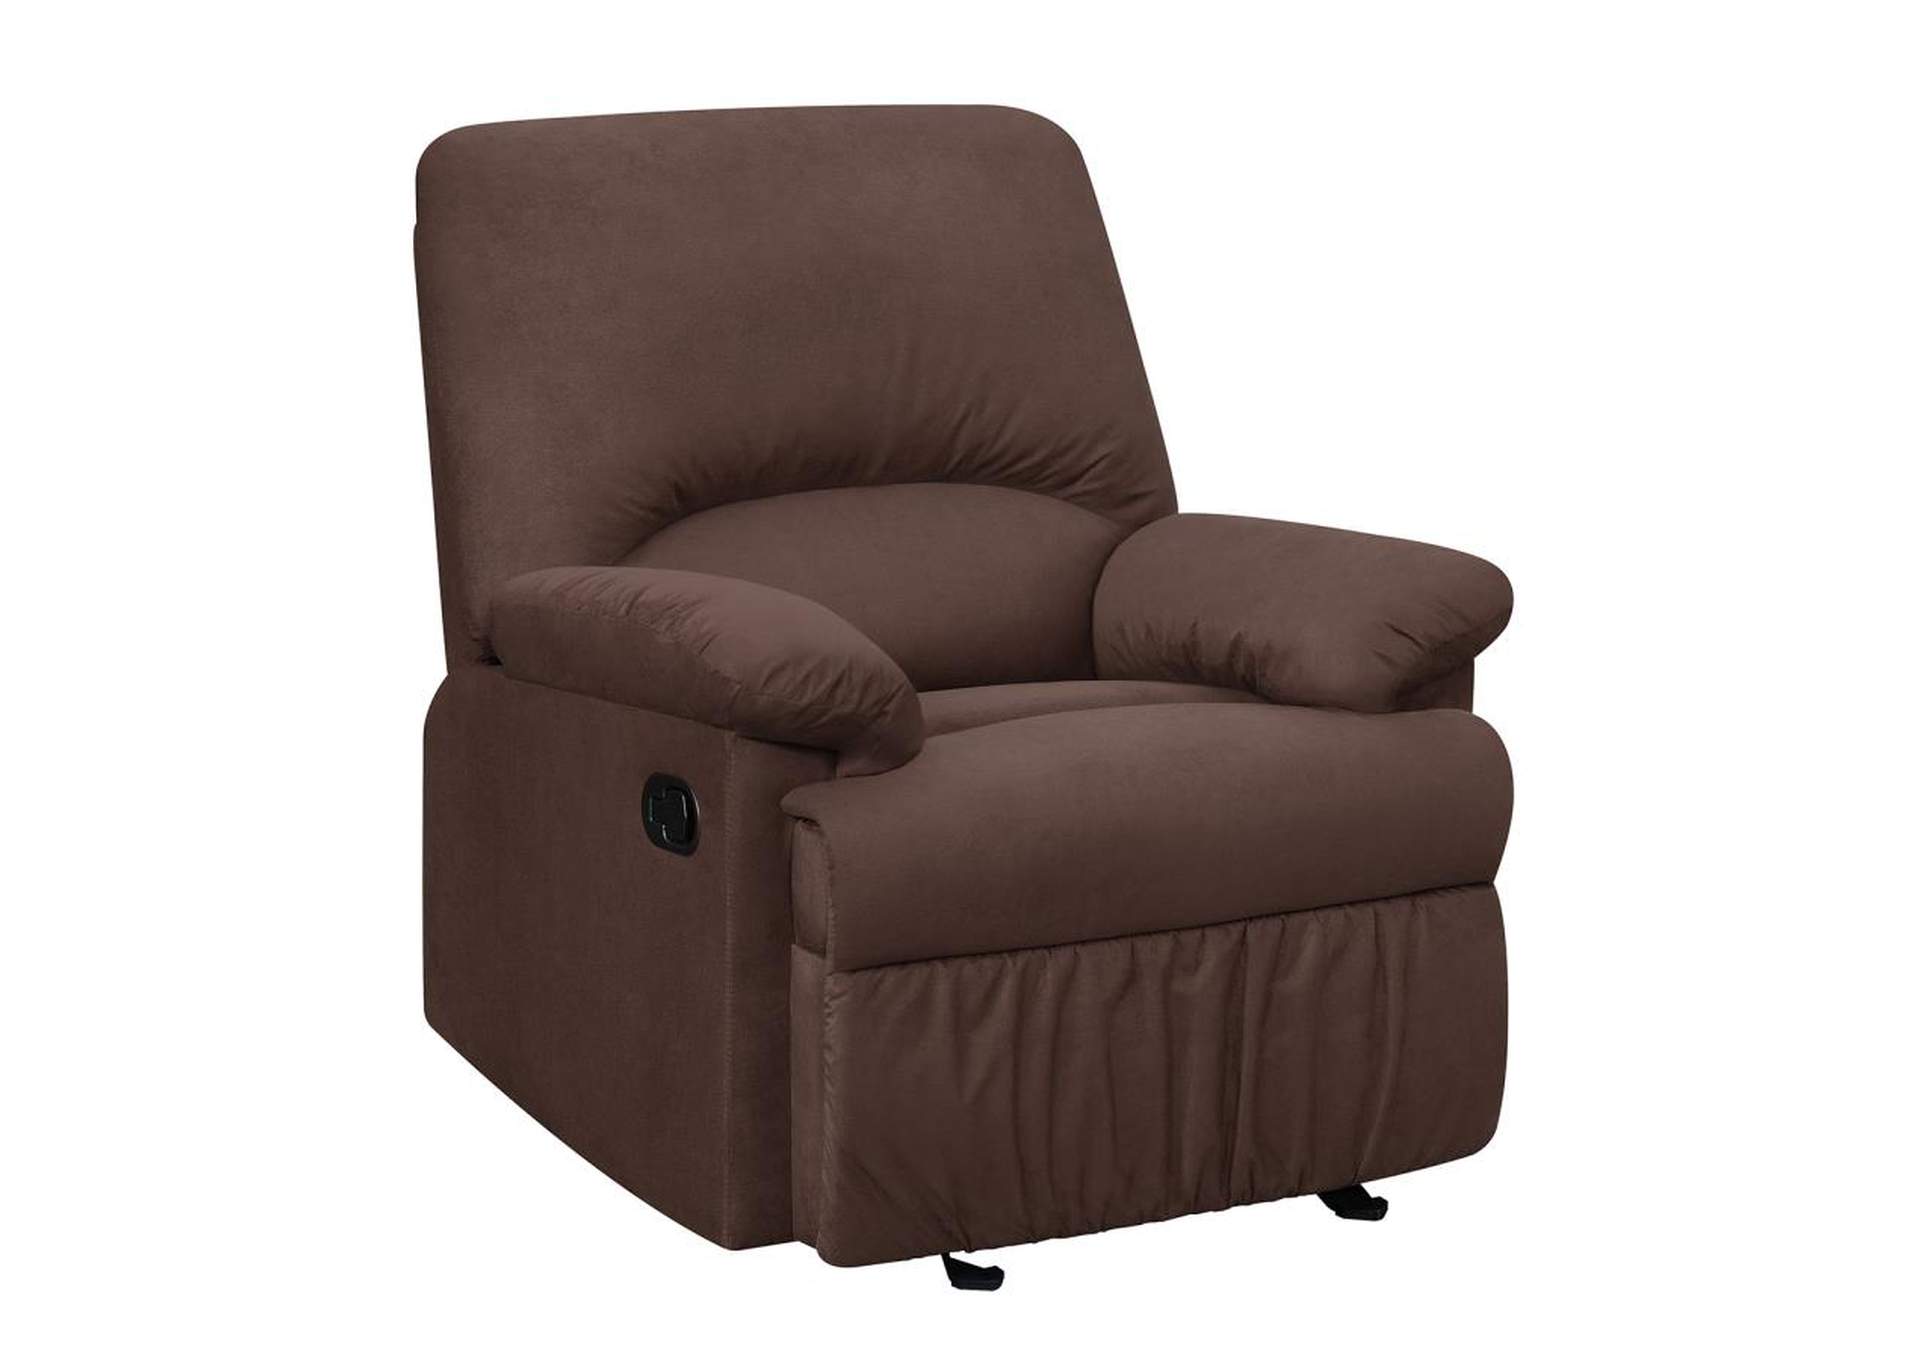 Upholstered Glider Recliner Chocolate,Coaster Furniture